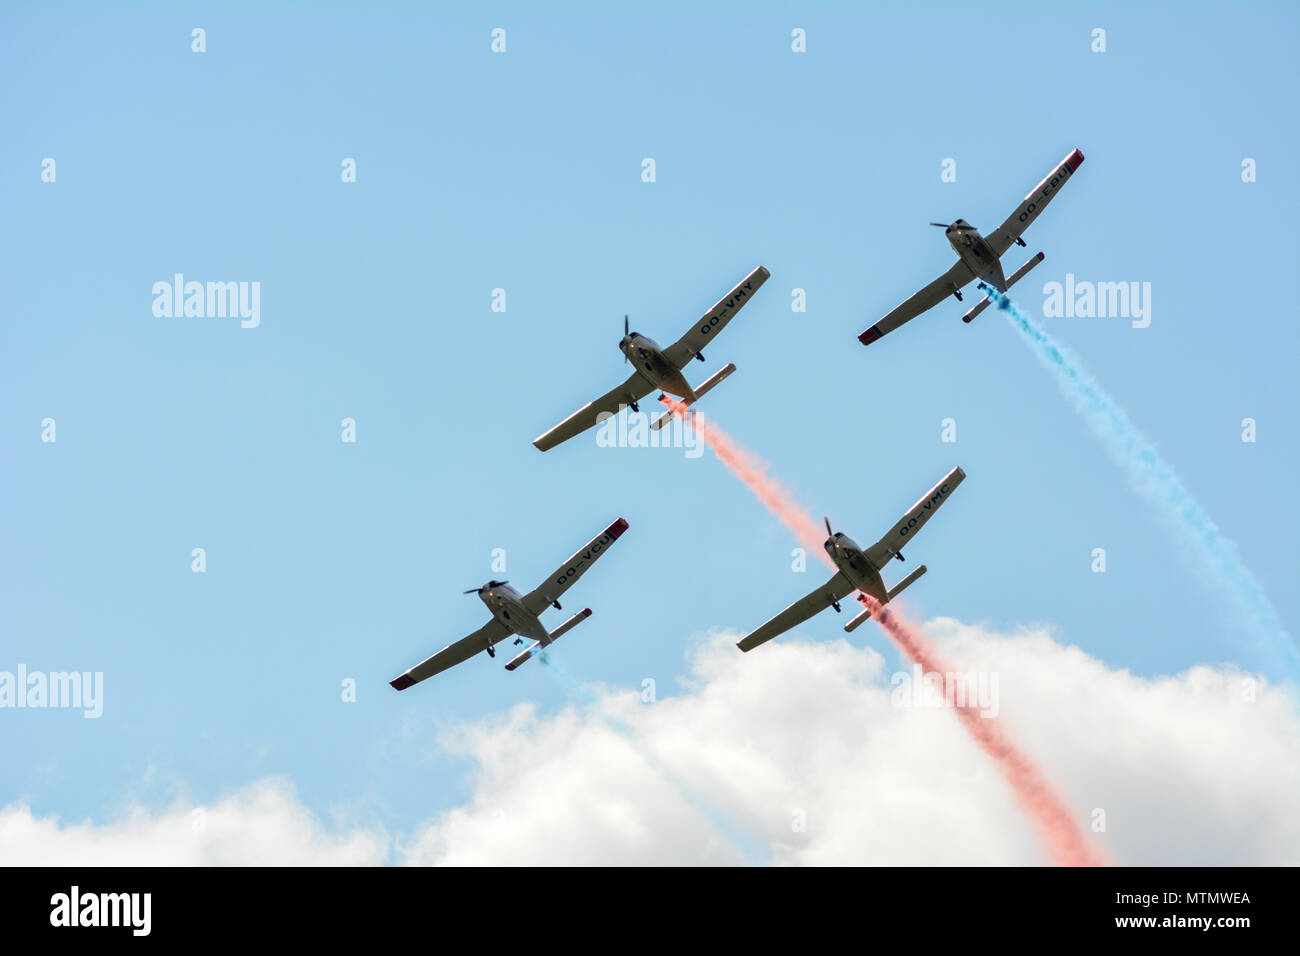 Airplanes doing stunts at an airshow. Stock Photo